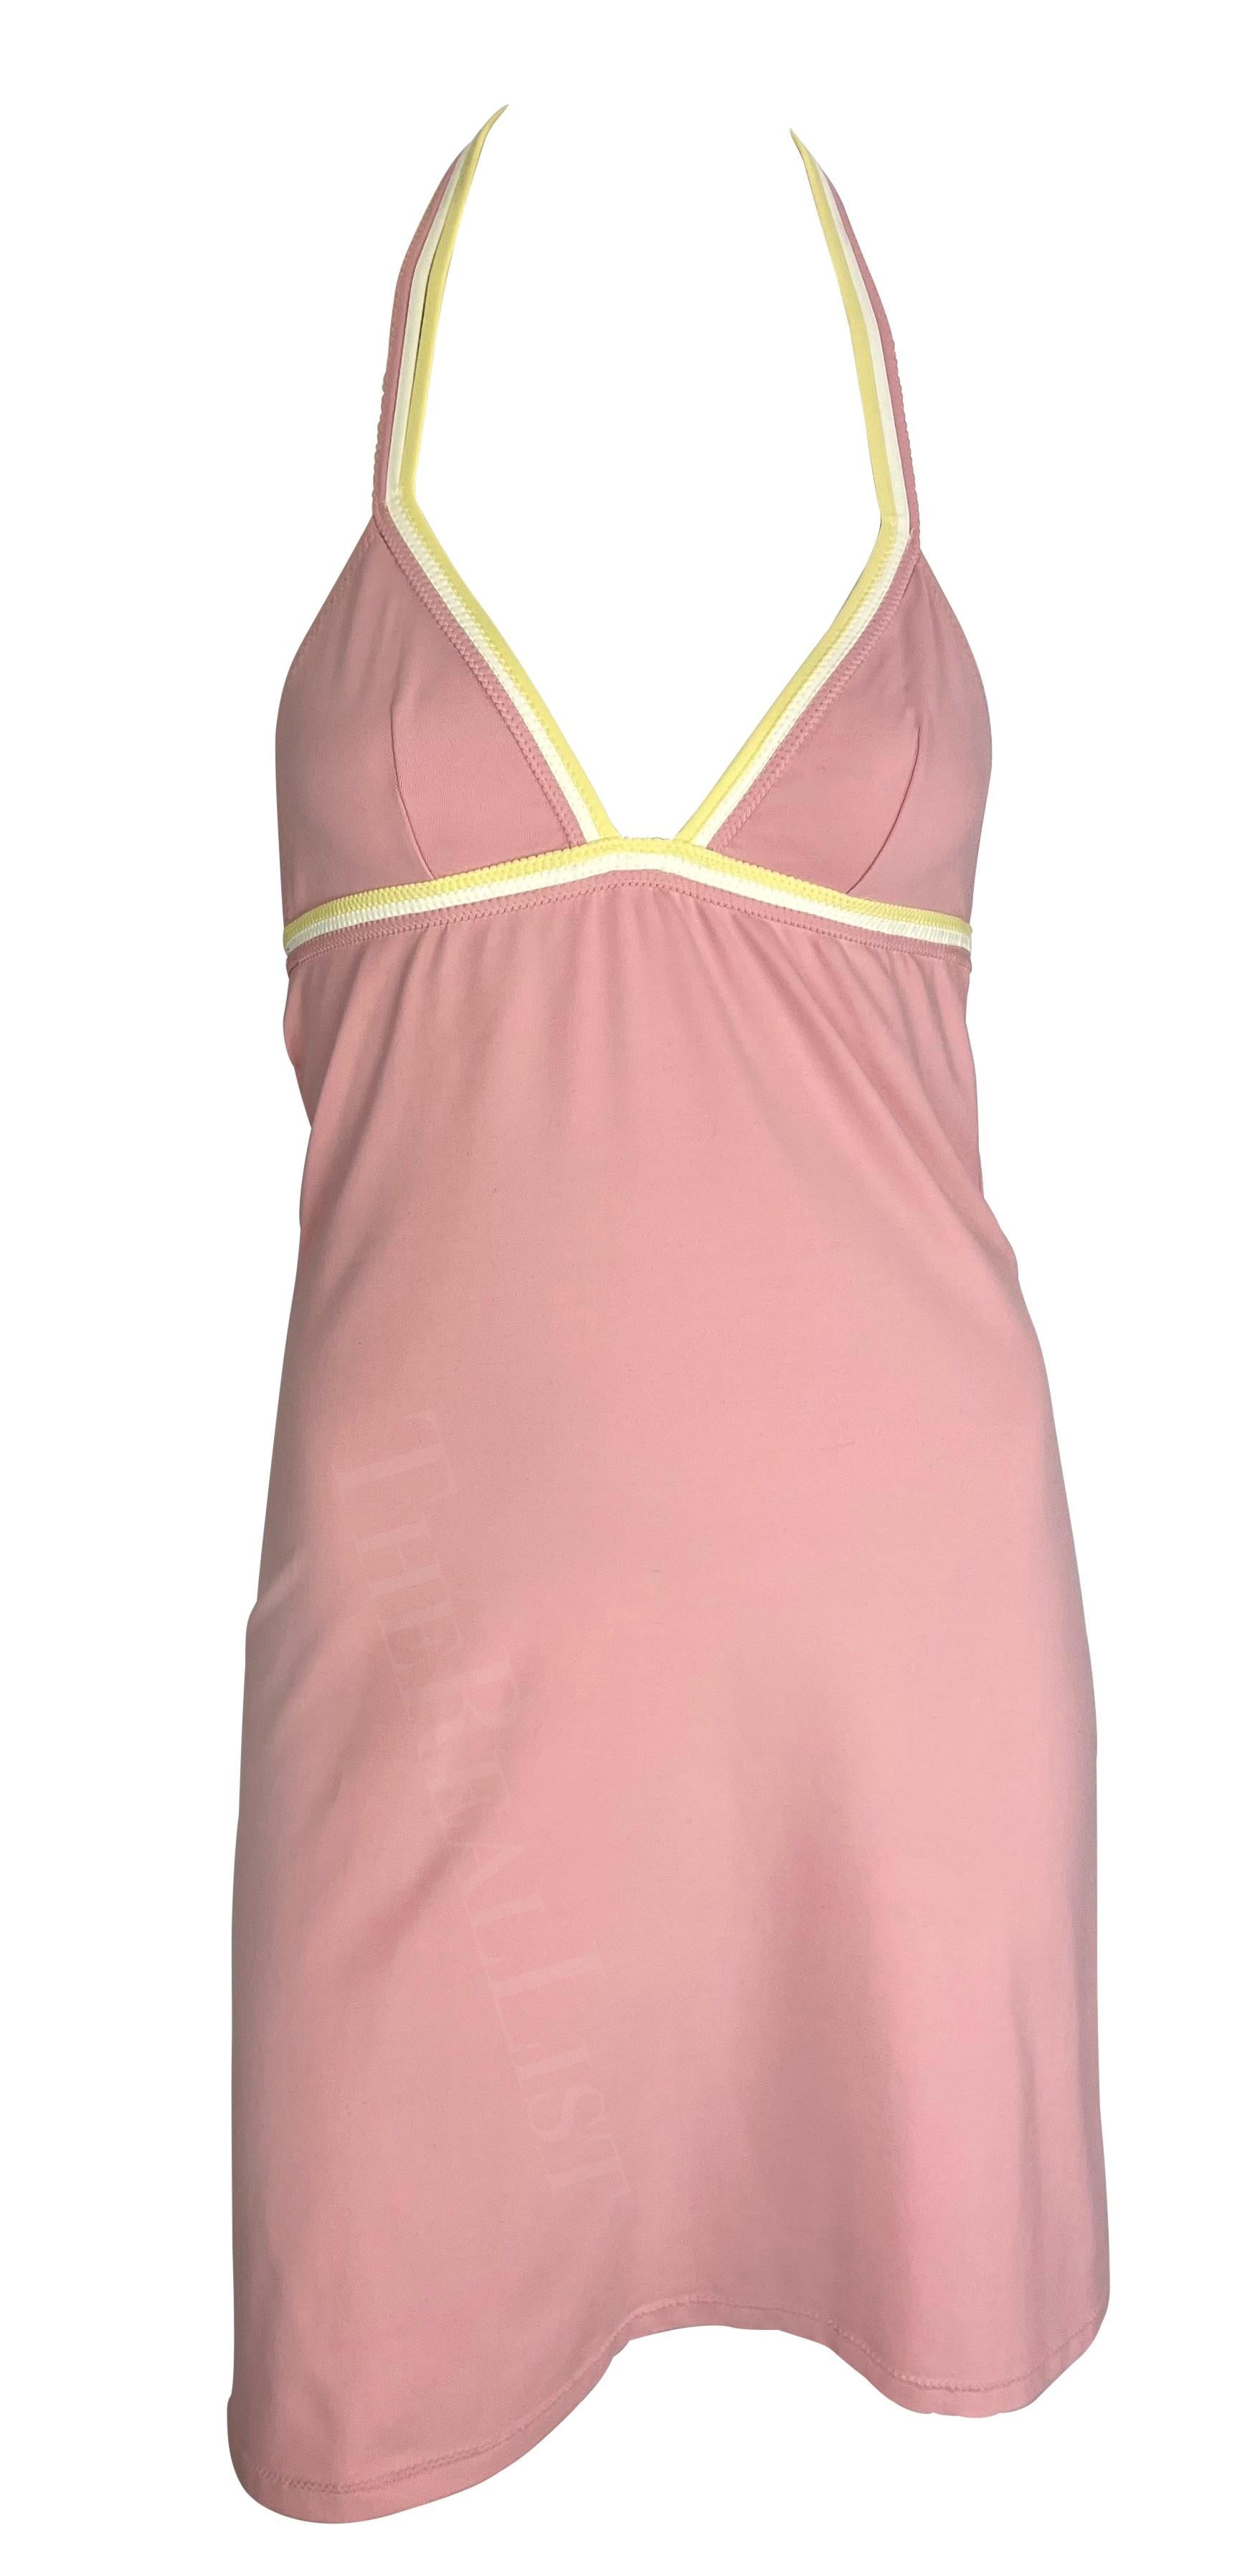 2004 Cruise Chanel by Karl Lagerfeld Pink Bodycon Halterneck Mini Dress For Sale 4